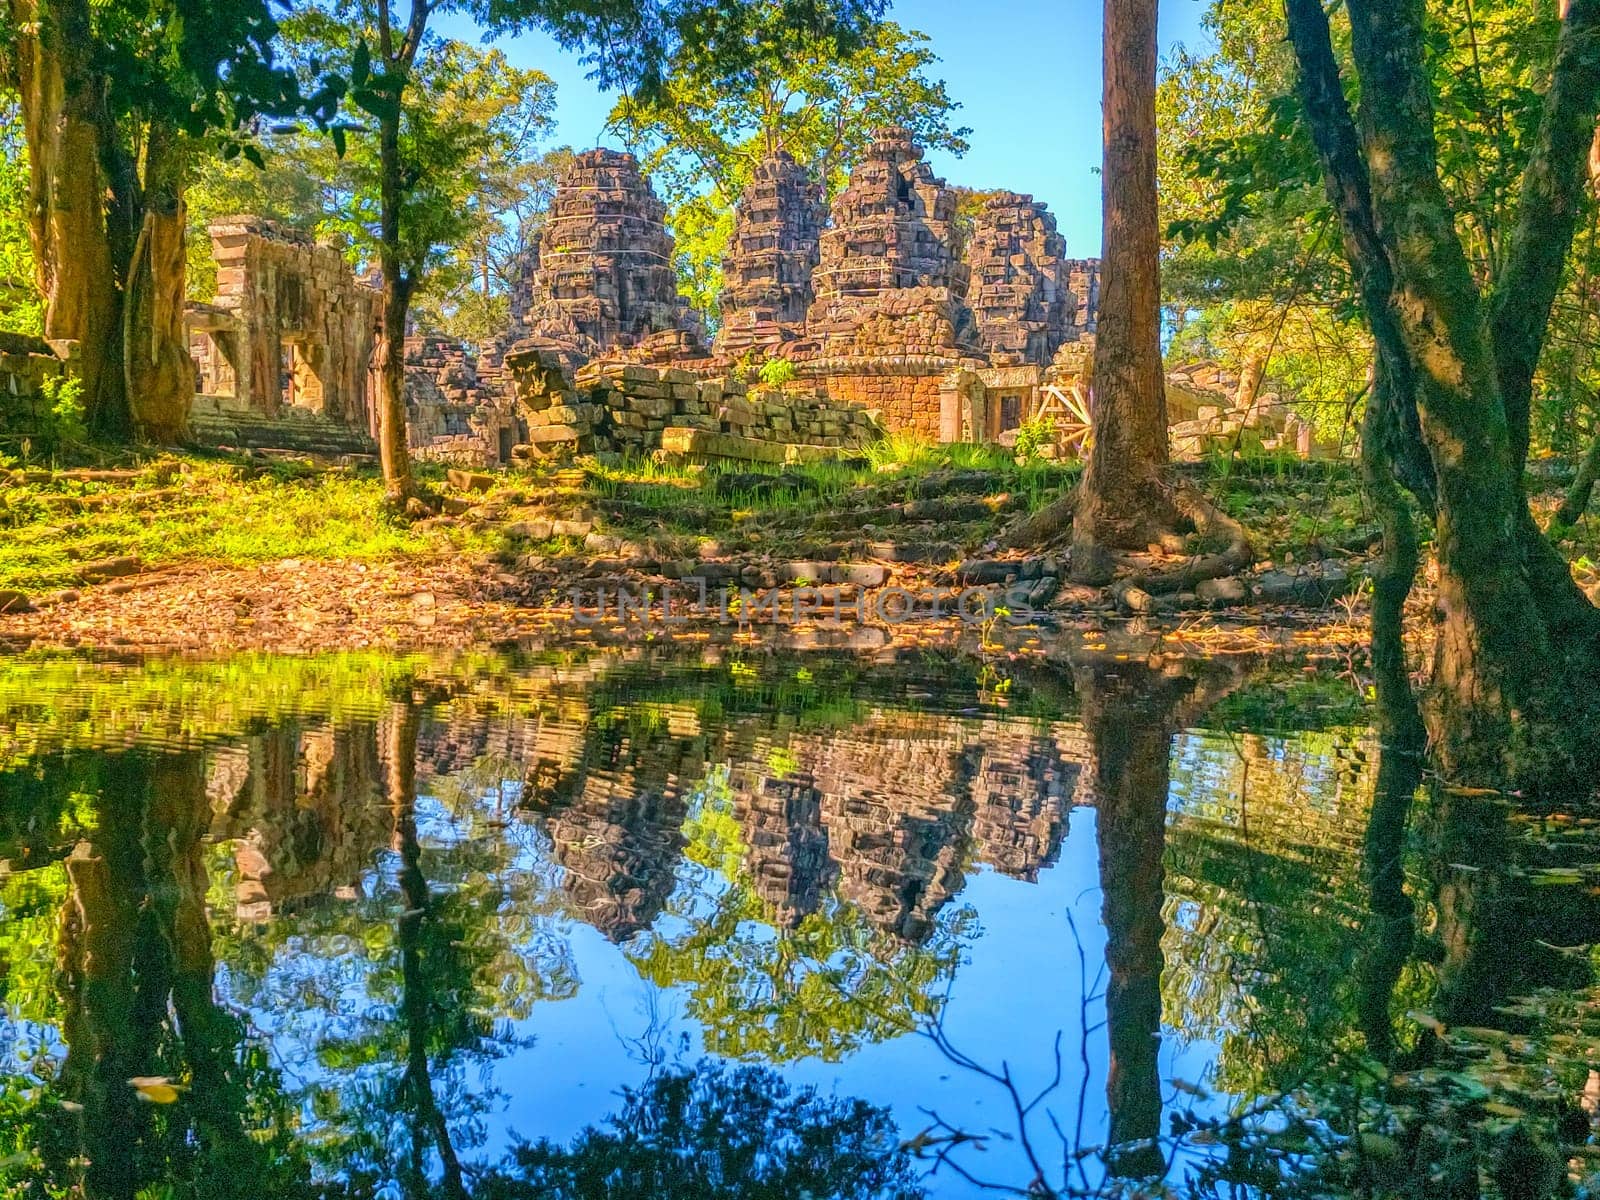 Banteay Kdei temple at Angkor Thom, Siem Reap, Cambodia by Elenaphotos21